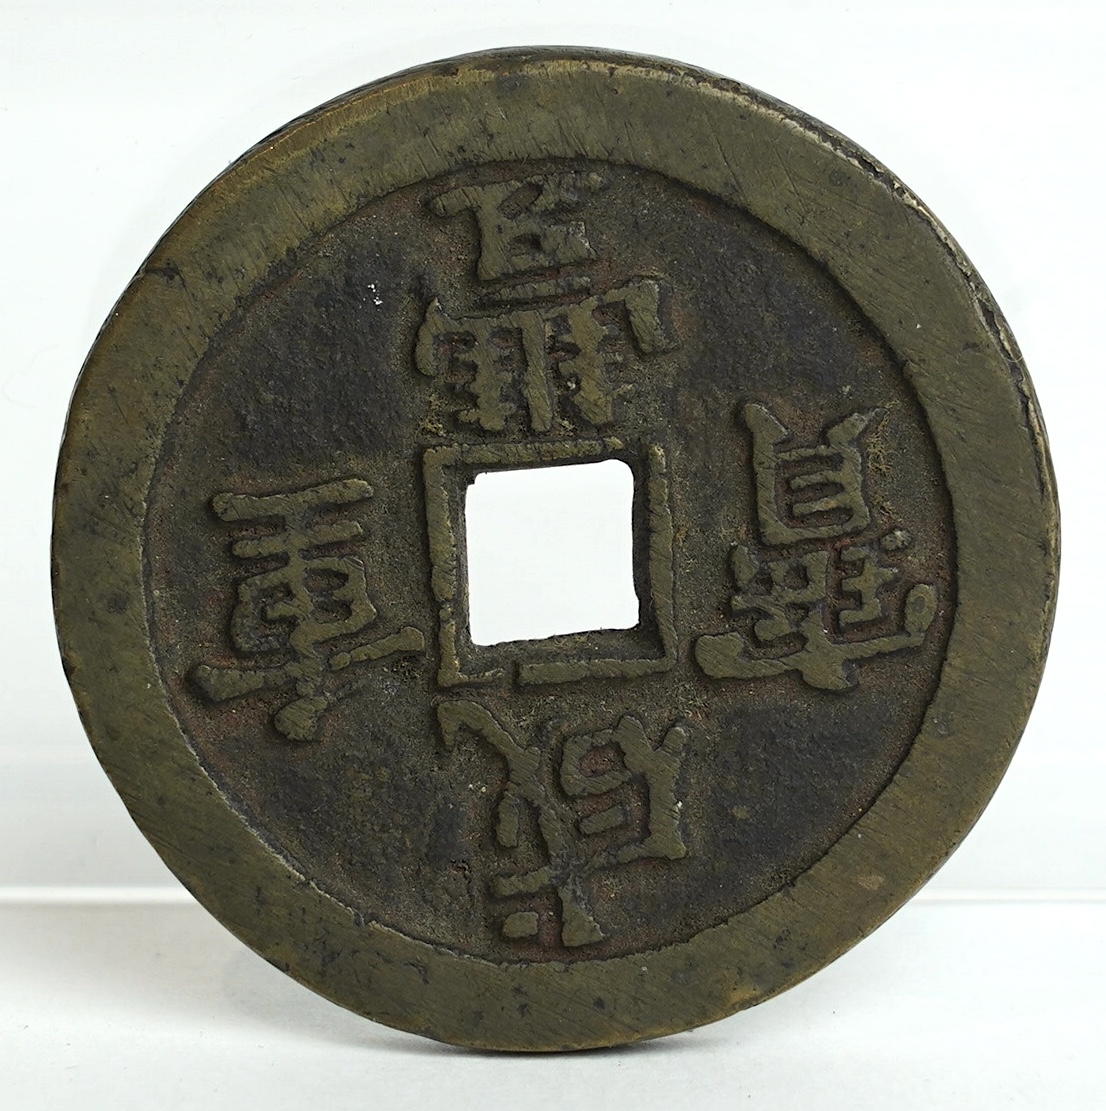 China coins, Qing dynasty, Xianfeng tongbao (1851-61), bronze 50 cash, type M, the board of revenue, probably West Branch, 45mm, 37g, Hartill 22.707